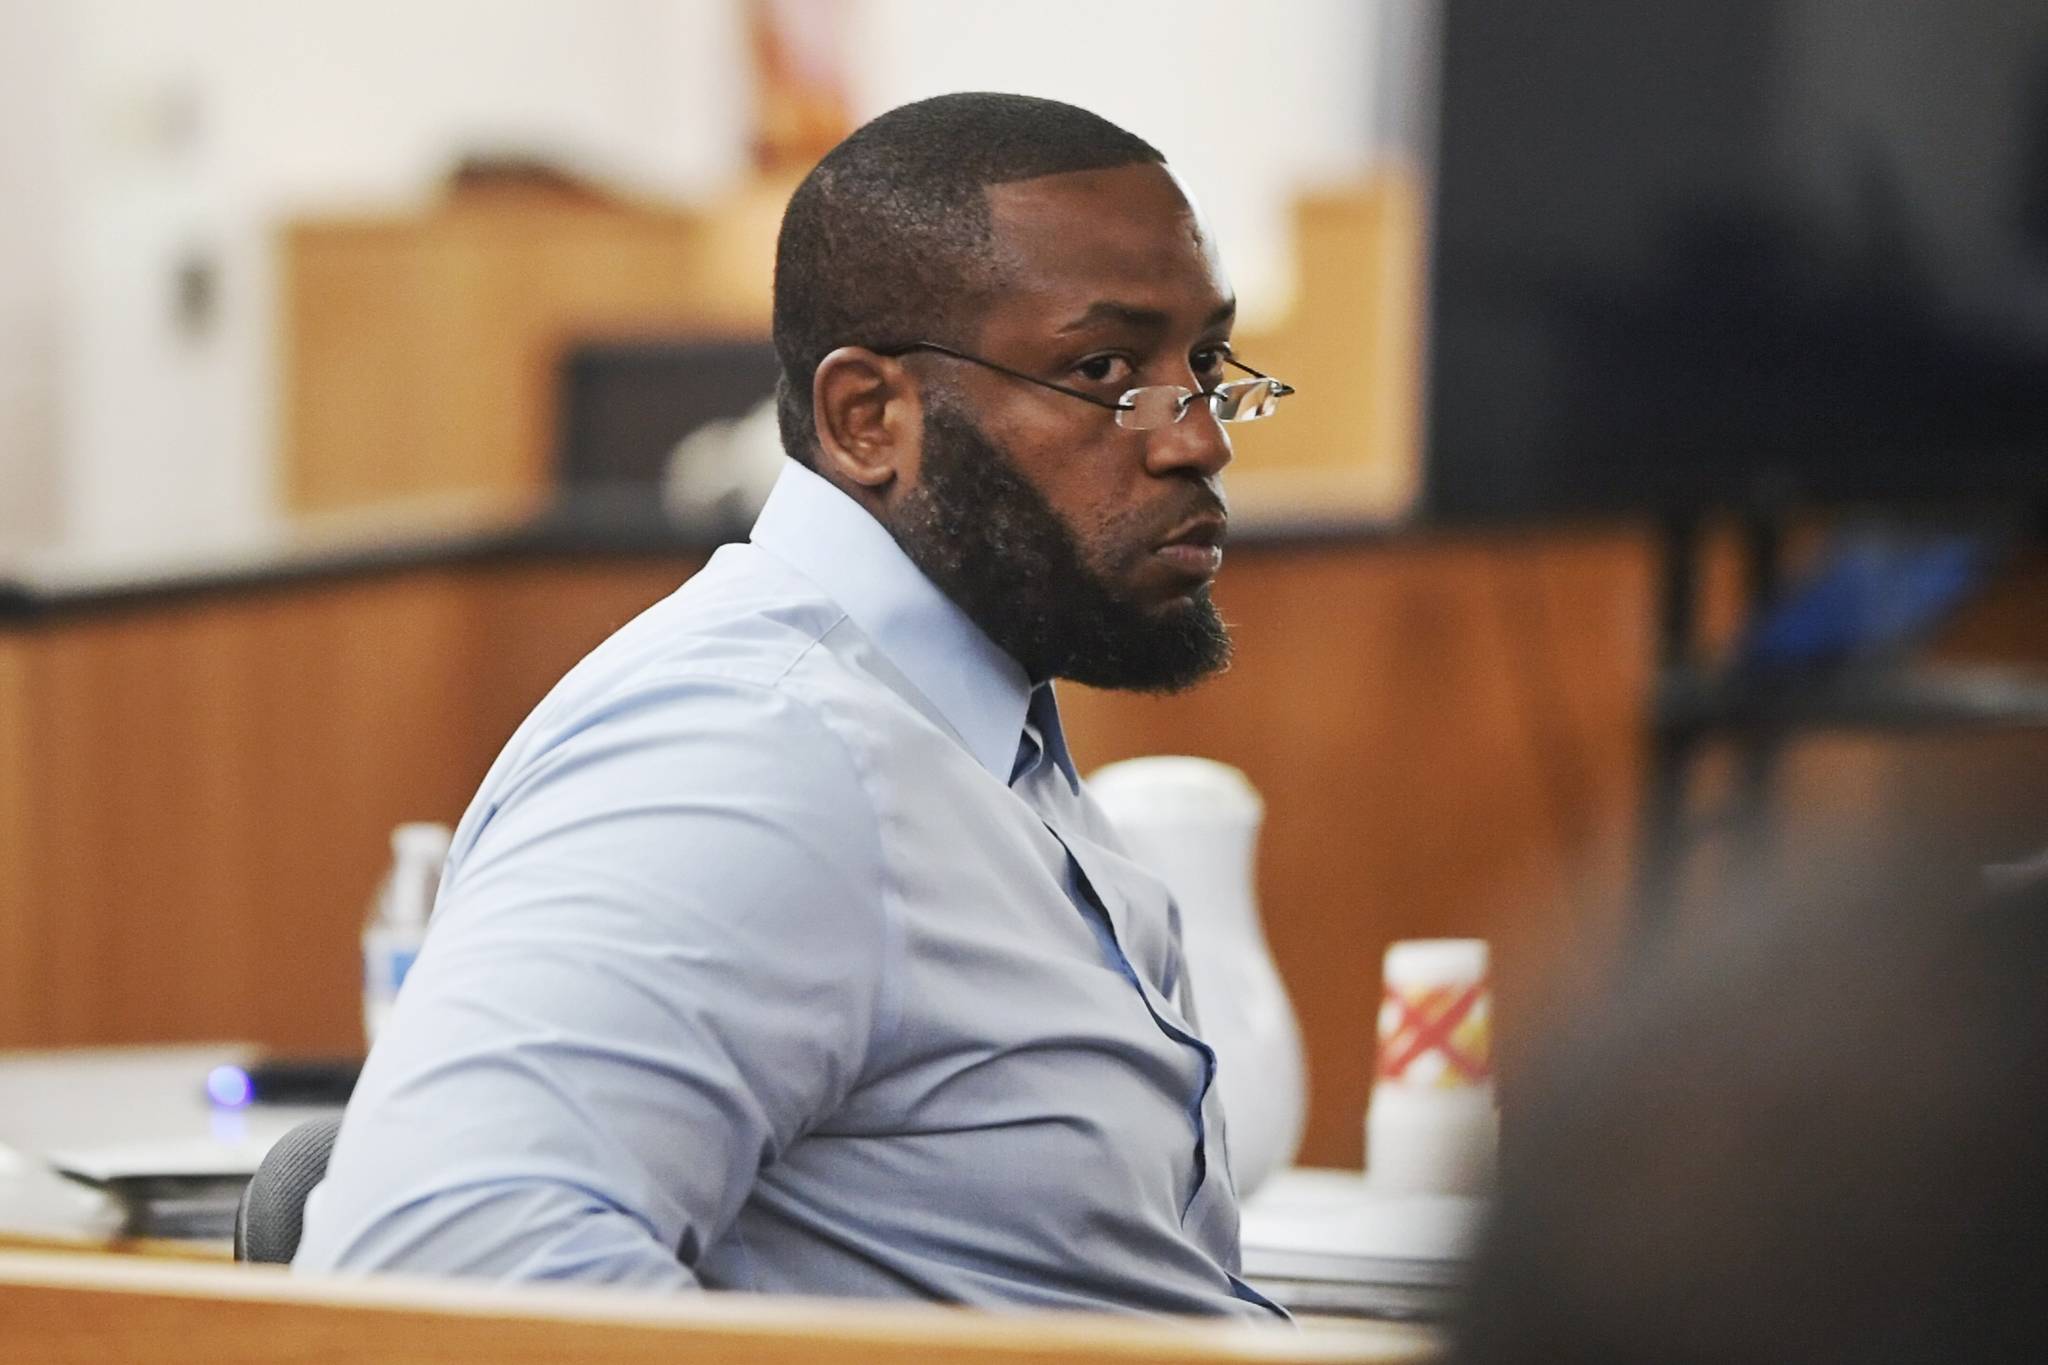 Laron Carlton Graham sits in Juneau Superior Court on Monday, Oct. 7, 2019, before closing arguments in his trial. Graham is facing two counts of first-degree murder for the November 2015 shooting deaths of 36-year-old Robert H. Meireis and 34-year-old Elizabeth K. Tonsmeire. (Michael Penn | Juneau Empire)